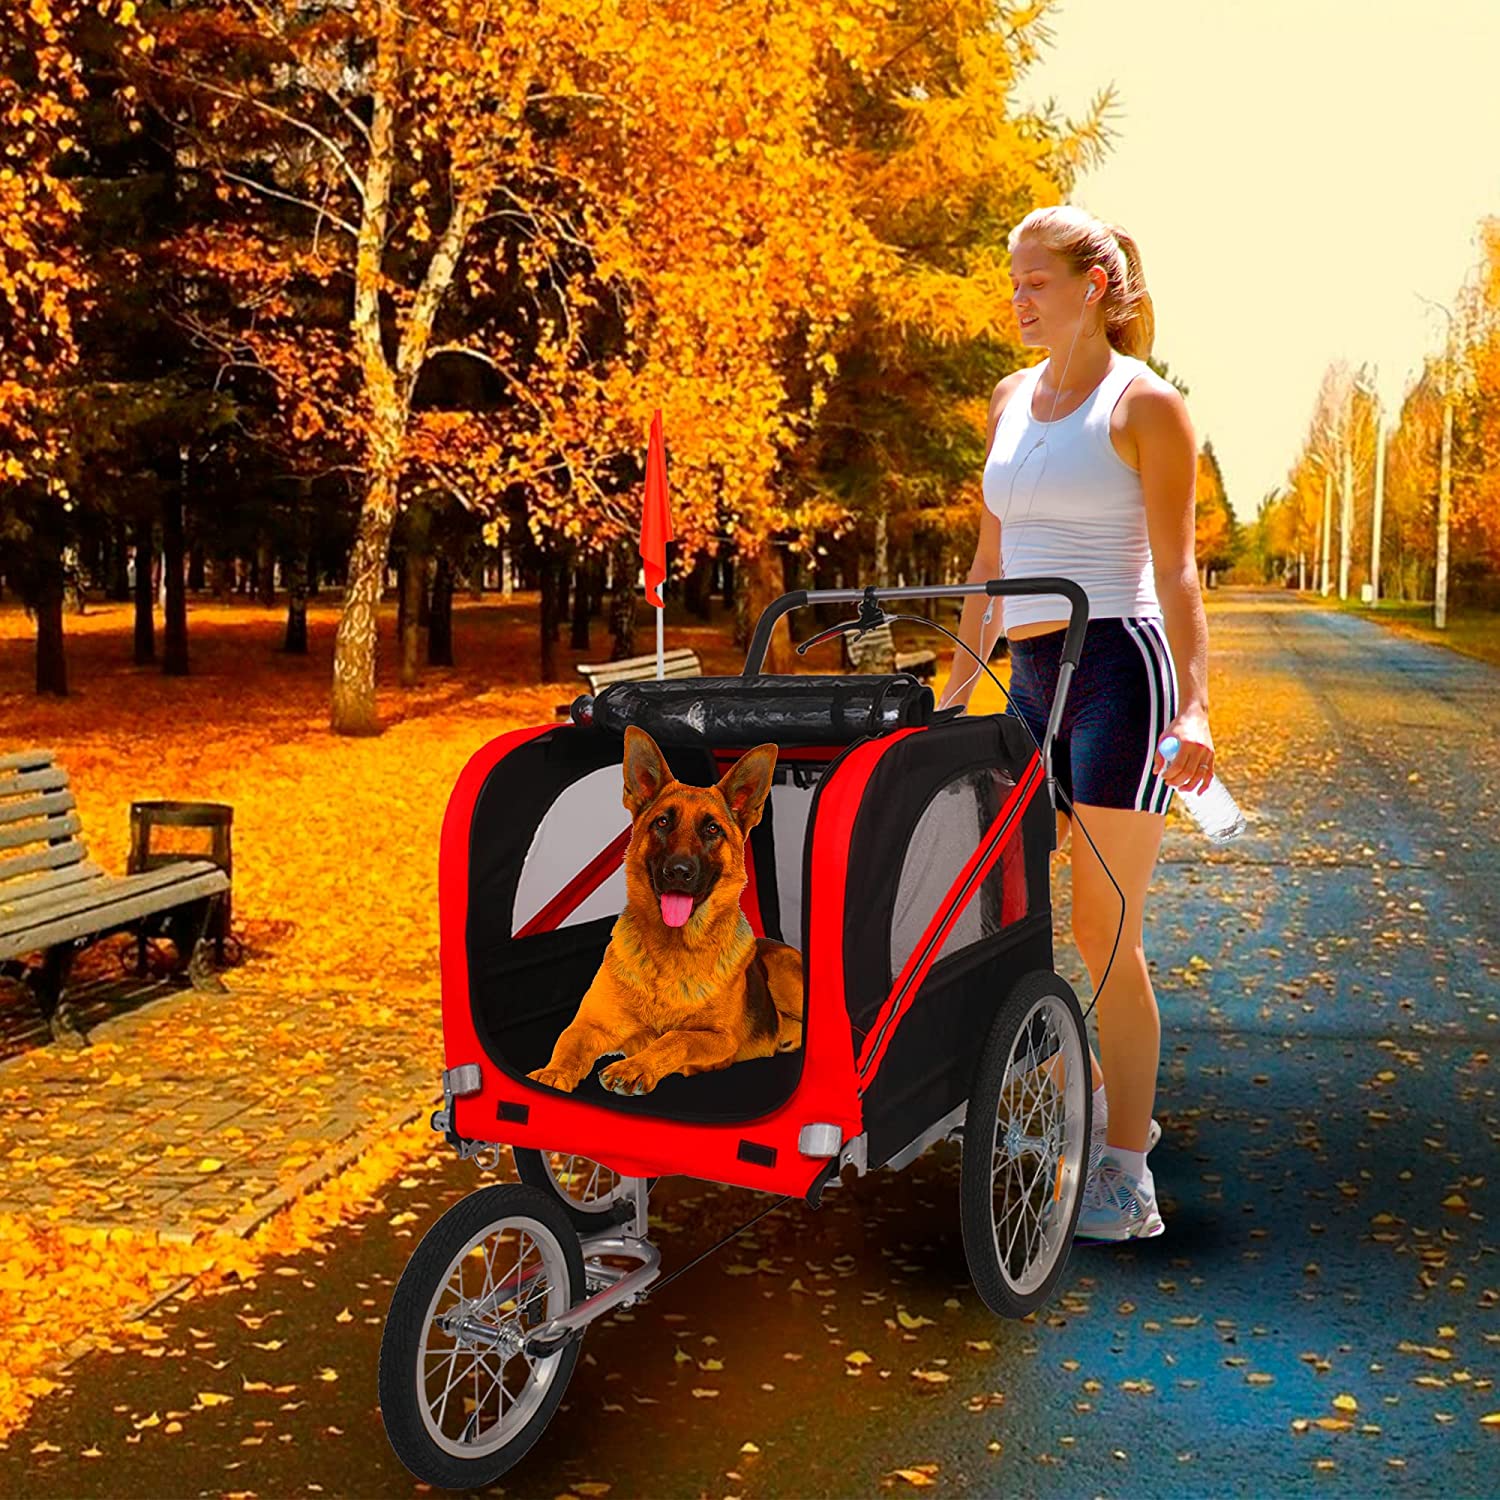 Dog Bike Trailer Cart 2 in 1 Pet Bicycle Stroller for Travel with Reflectors Parking Brake Breathable Protective Net, Red